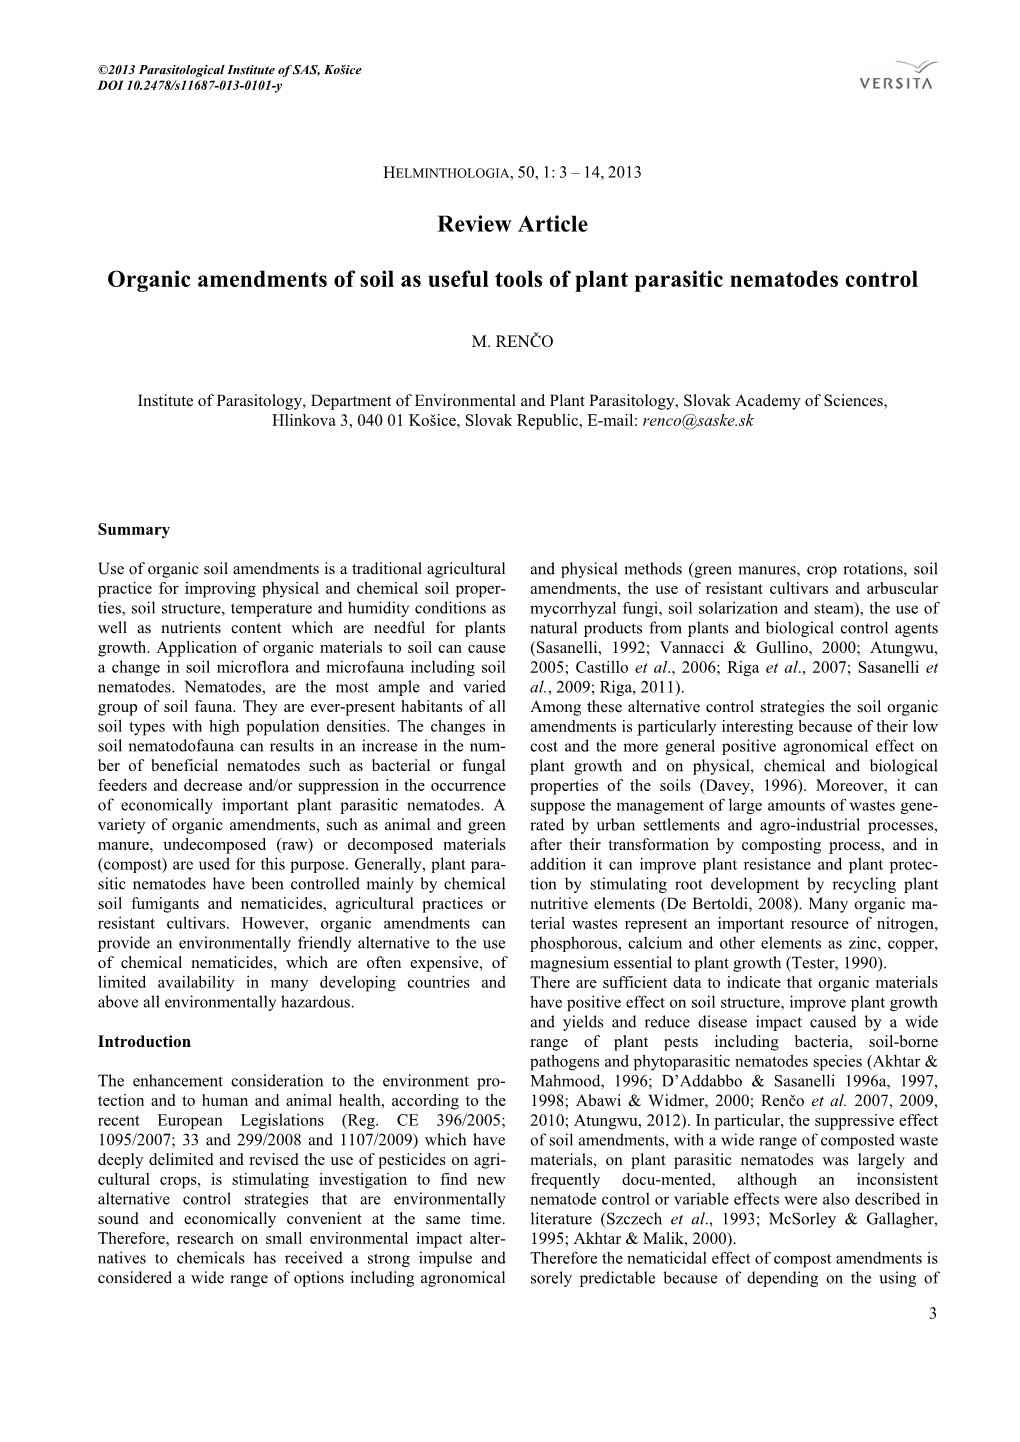 Review Article Organic Amendments of Soil As Useful Tools of Plant